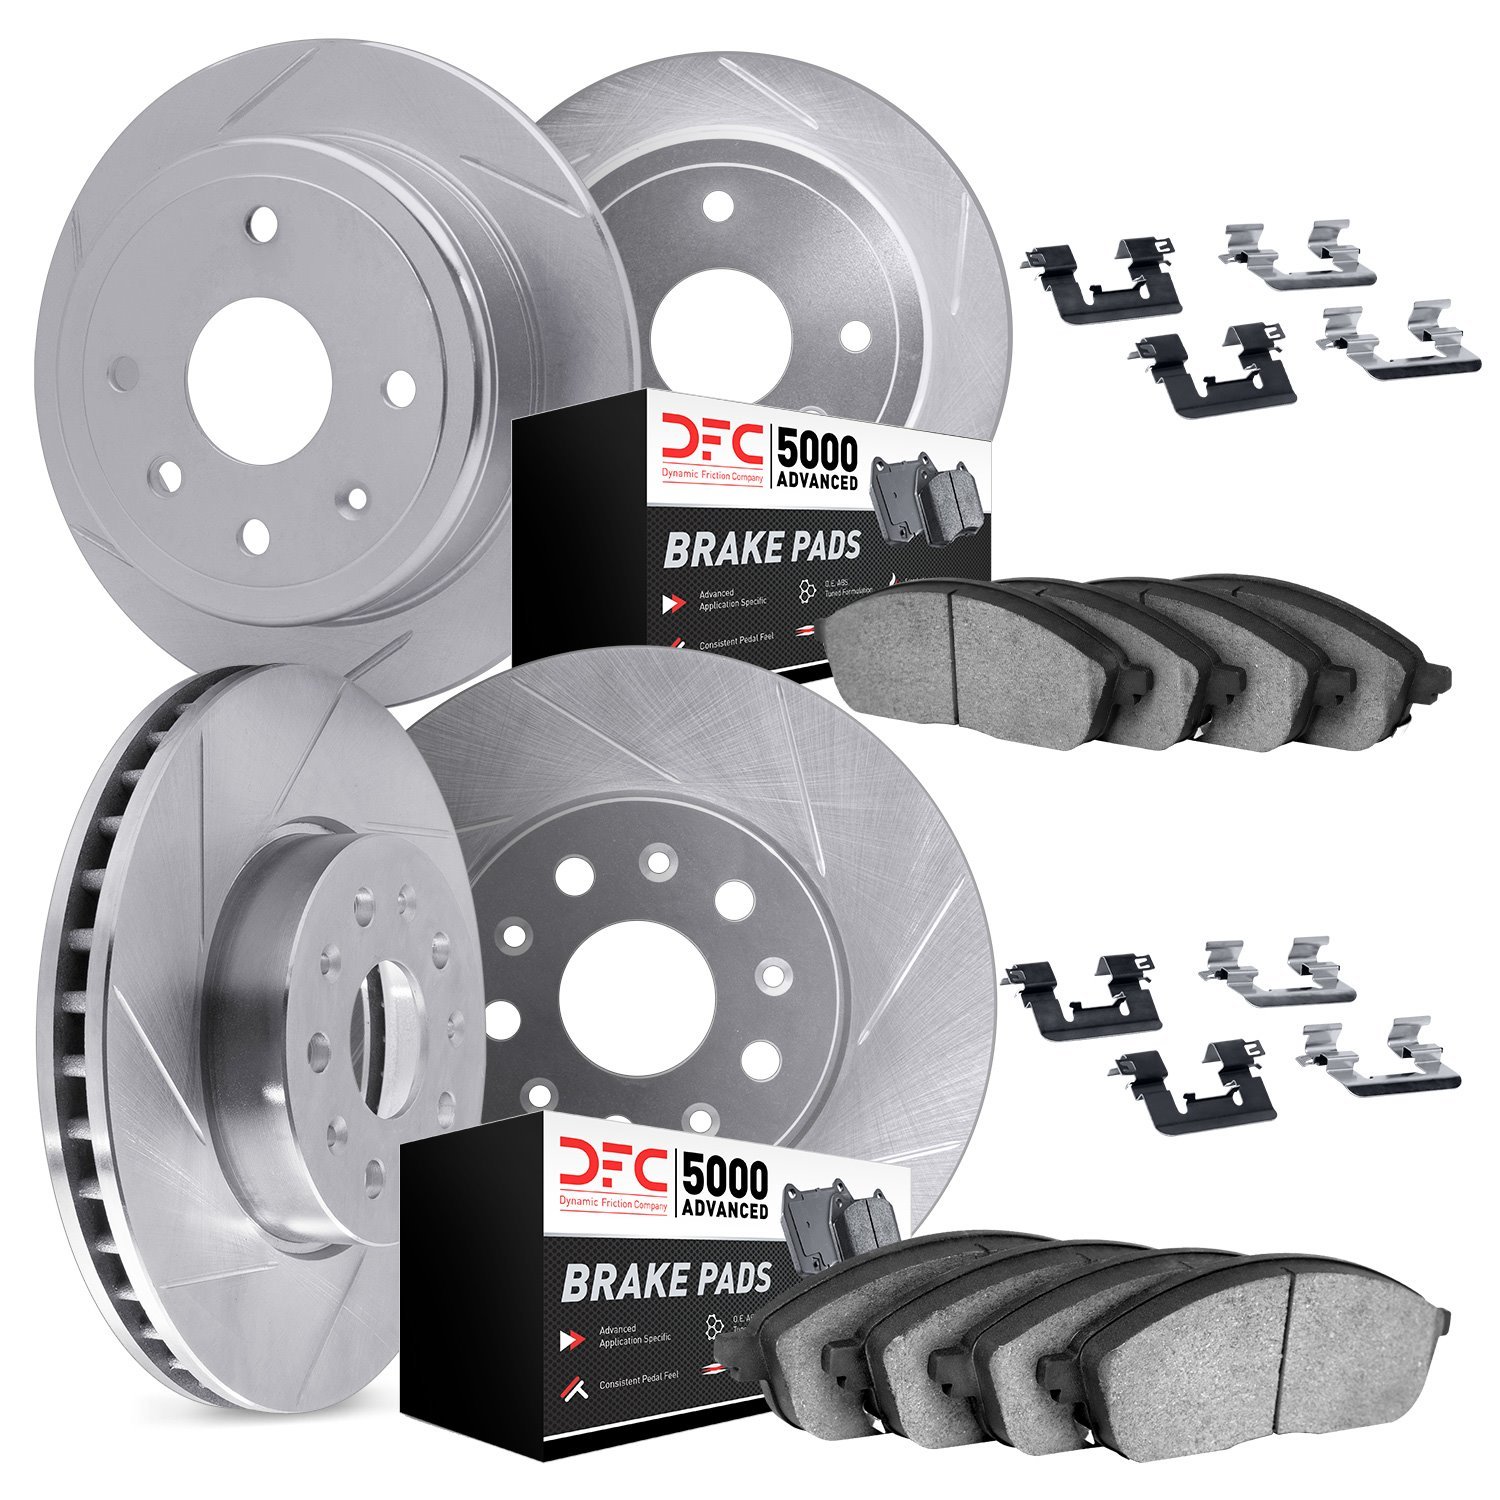 5514-58019 Slotted Brake Rotors w/5000 Advanced Brake Pads Kit & Hardware [Silver], 2014-2016 Acura/Honda, Position: Front and R